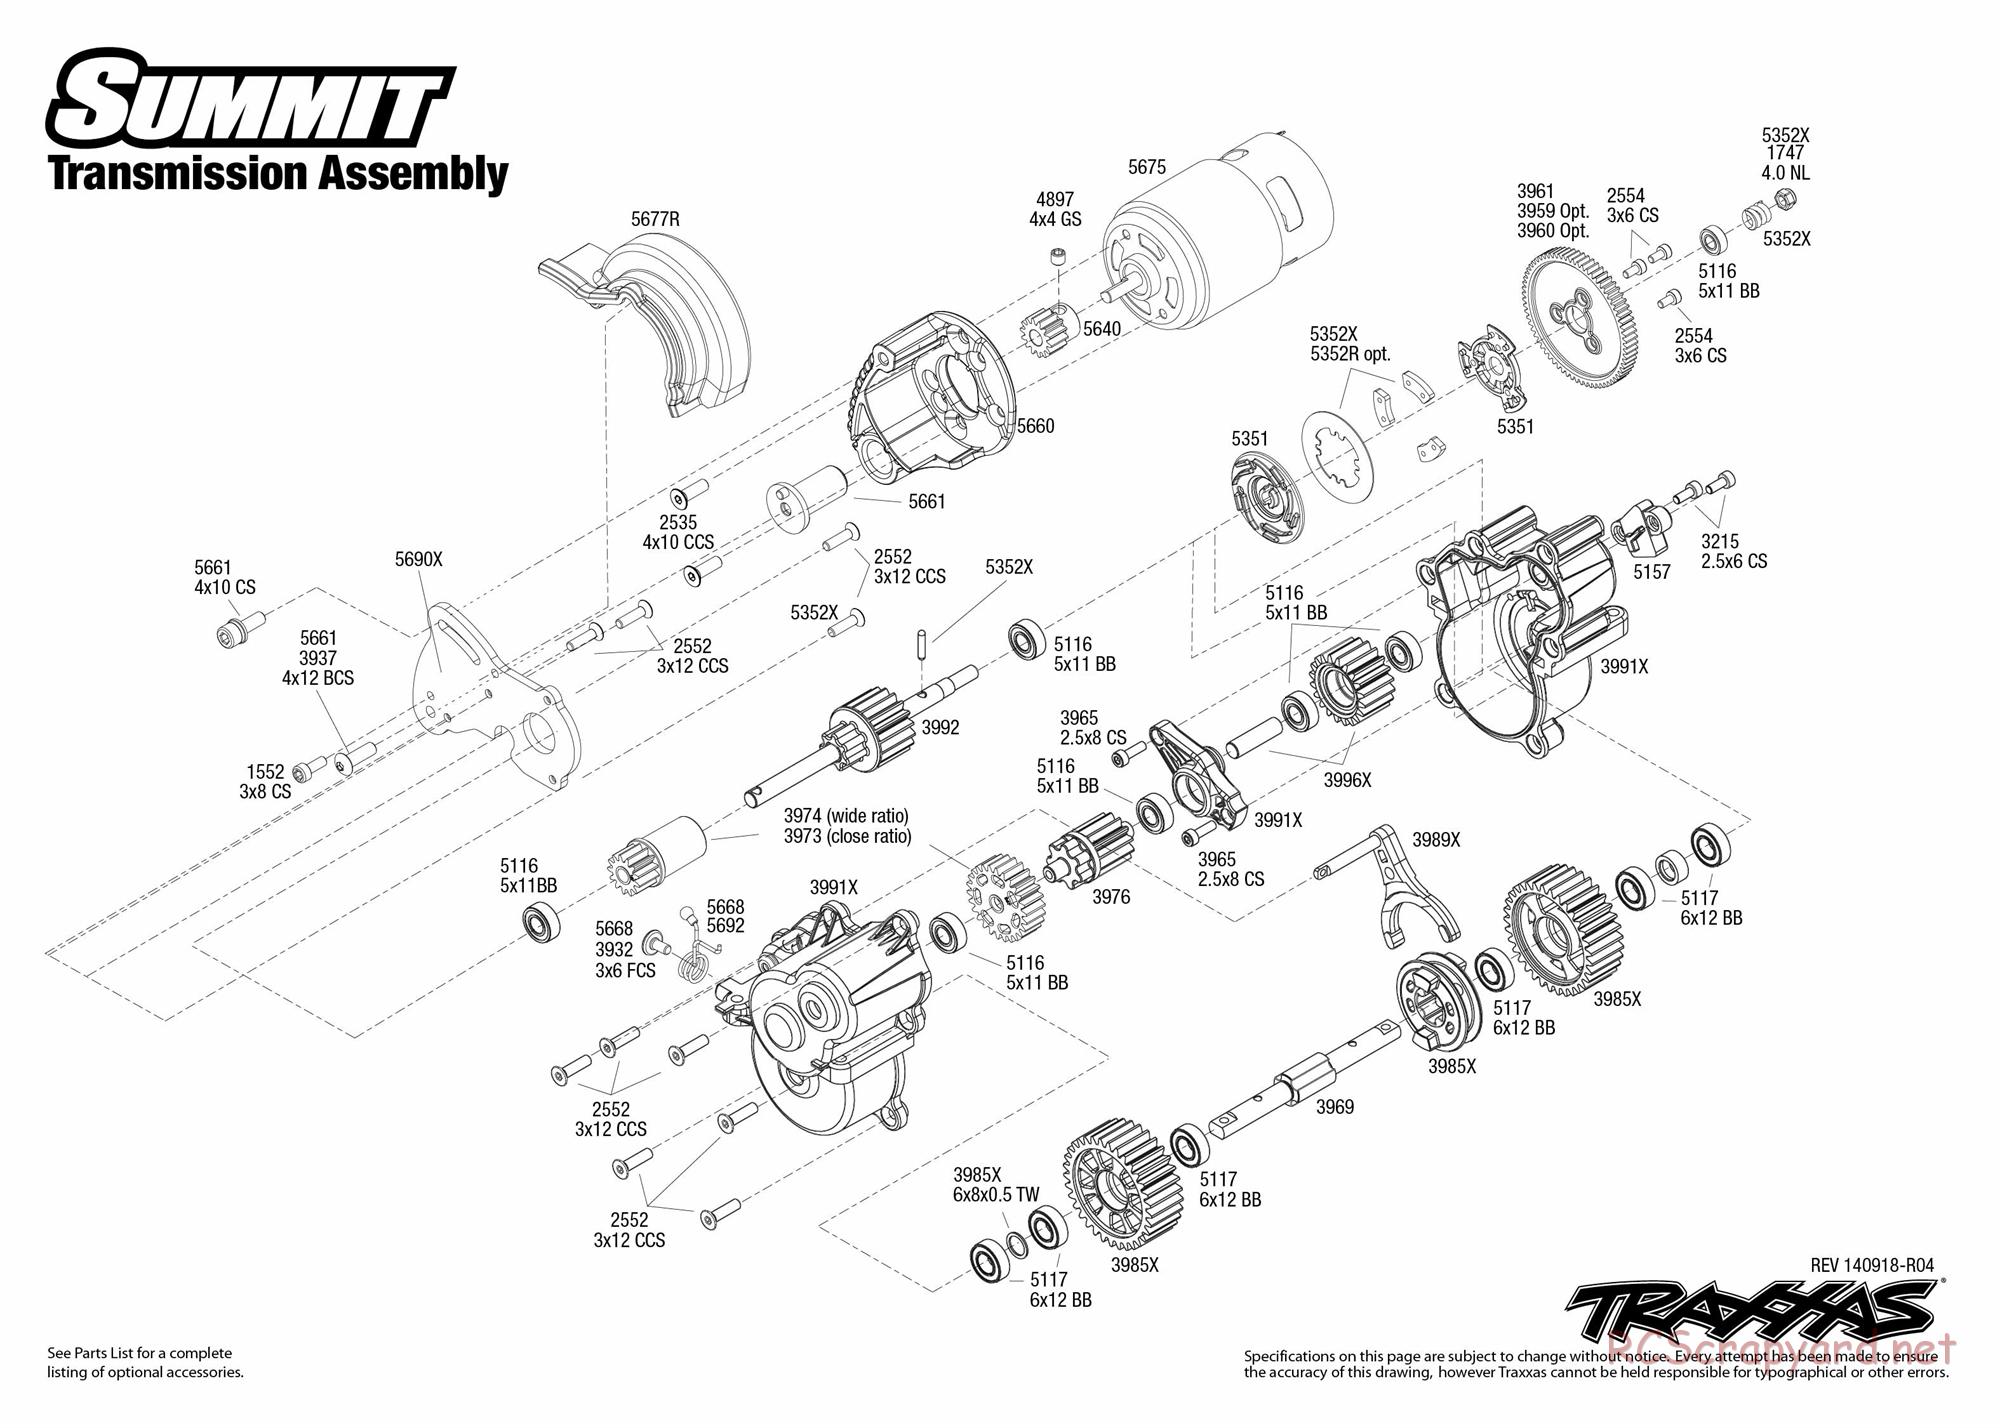 Traxxas - Summit - Exploded Views - Page 5